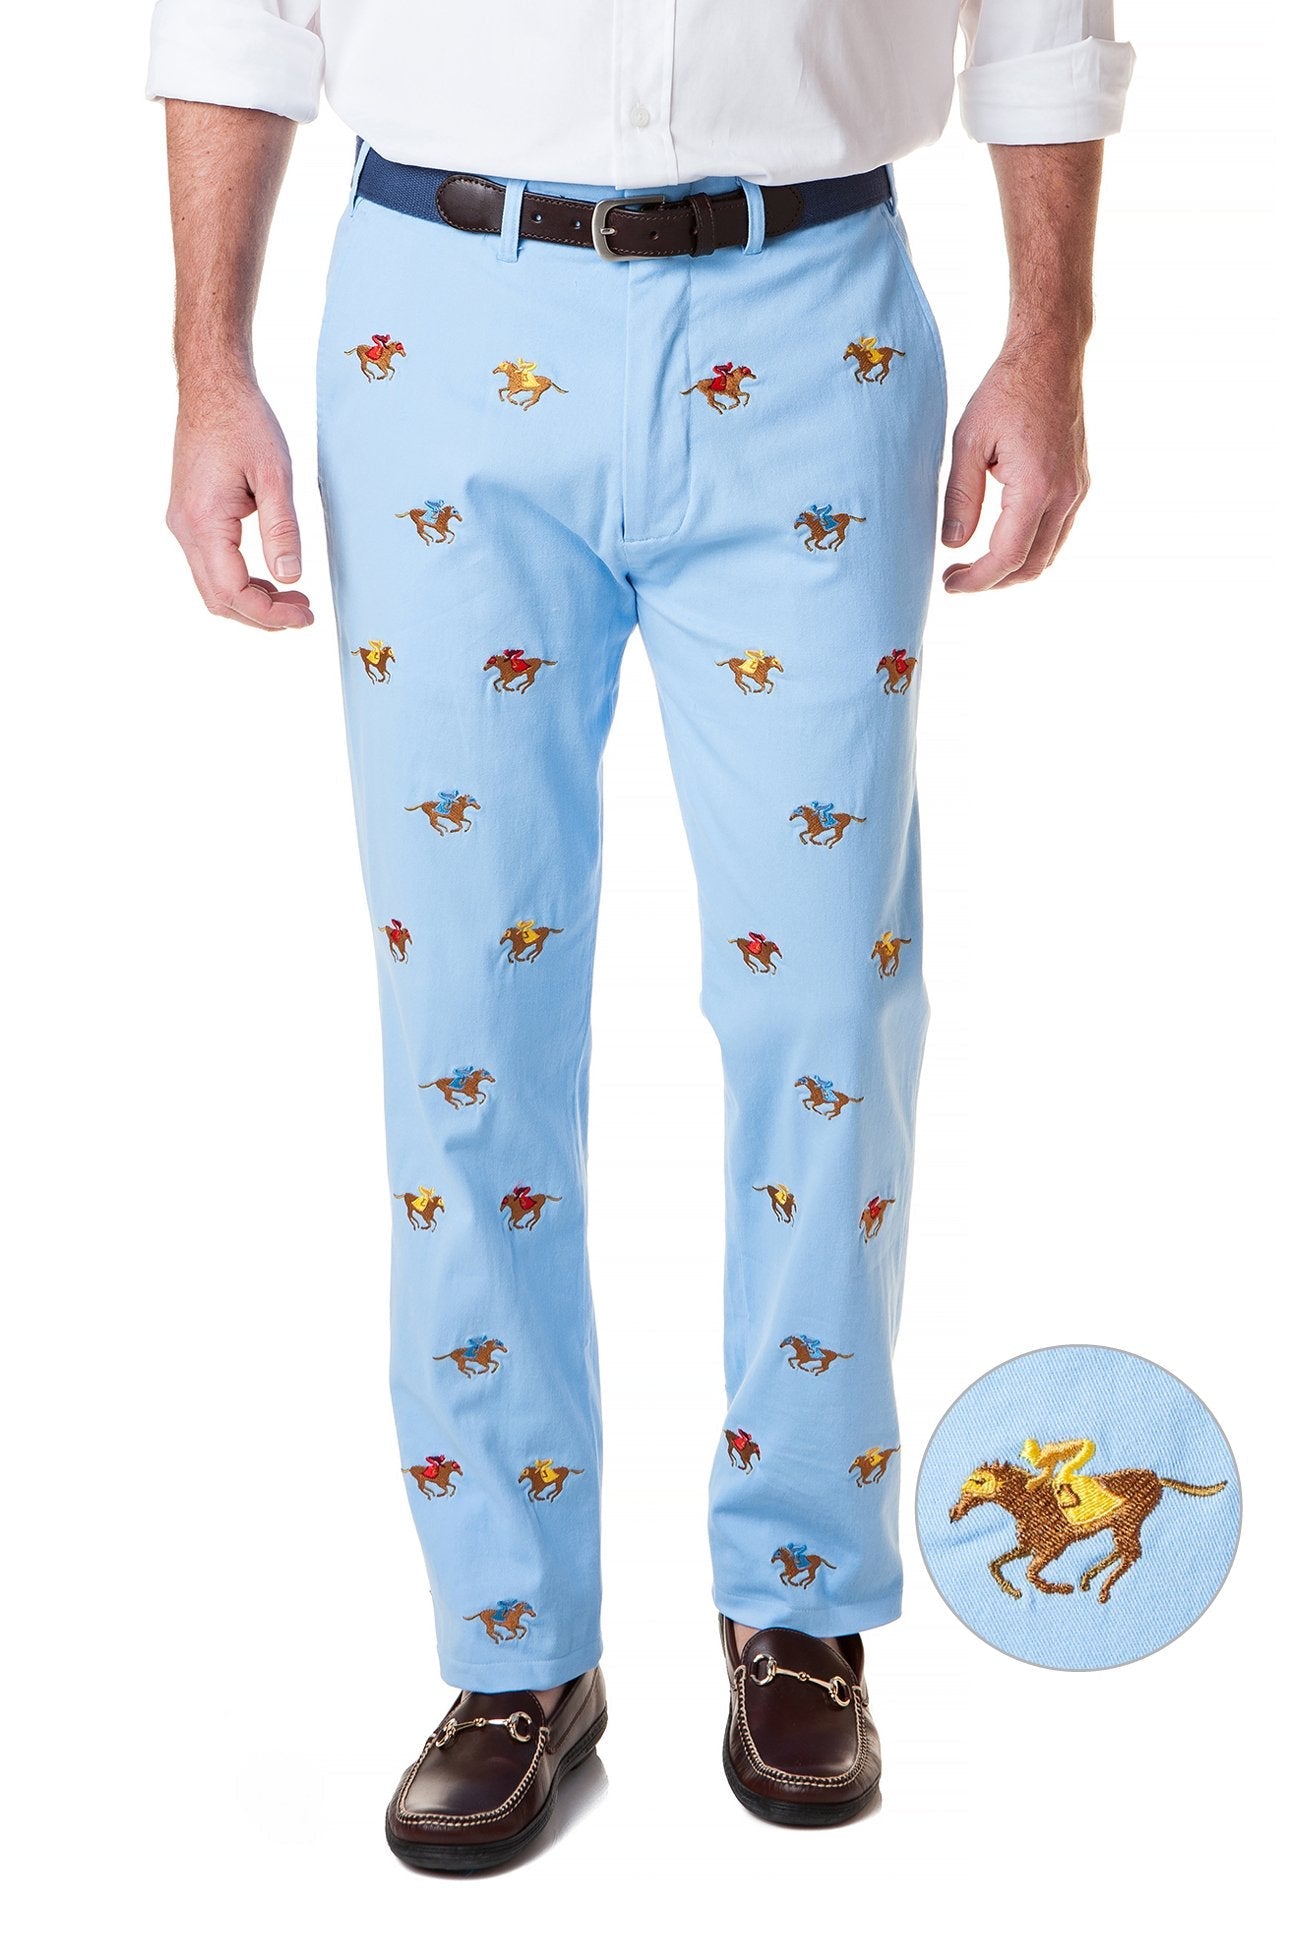 Castaway Mens Embroidered Twill Pants with Racing Horses - Derby Ready –  Castaway Nantucket Island